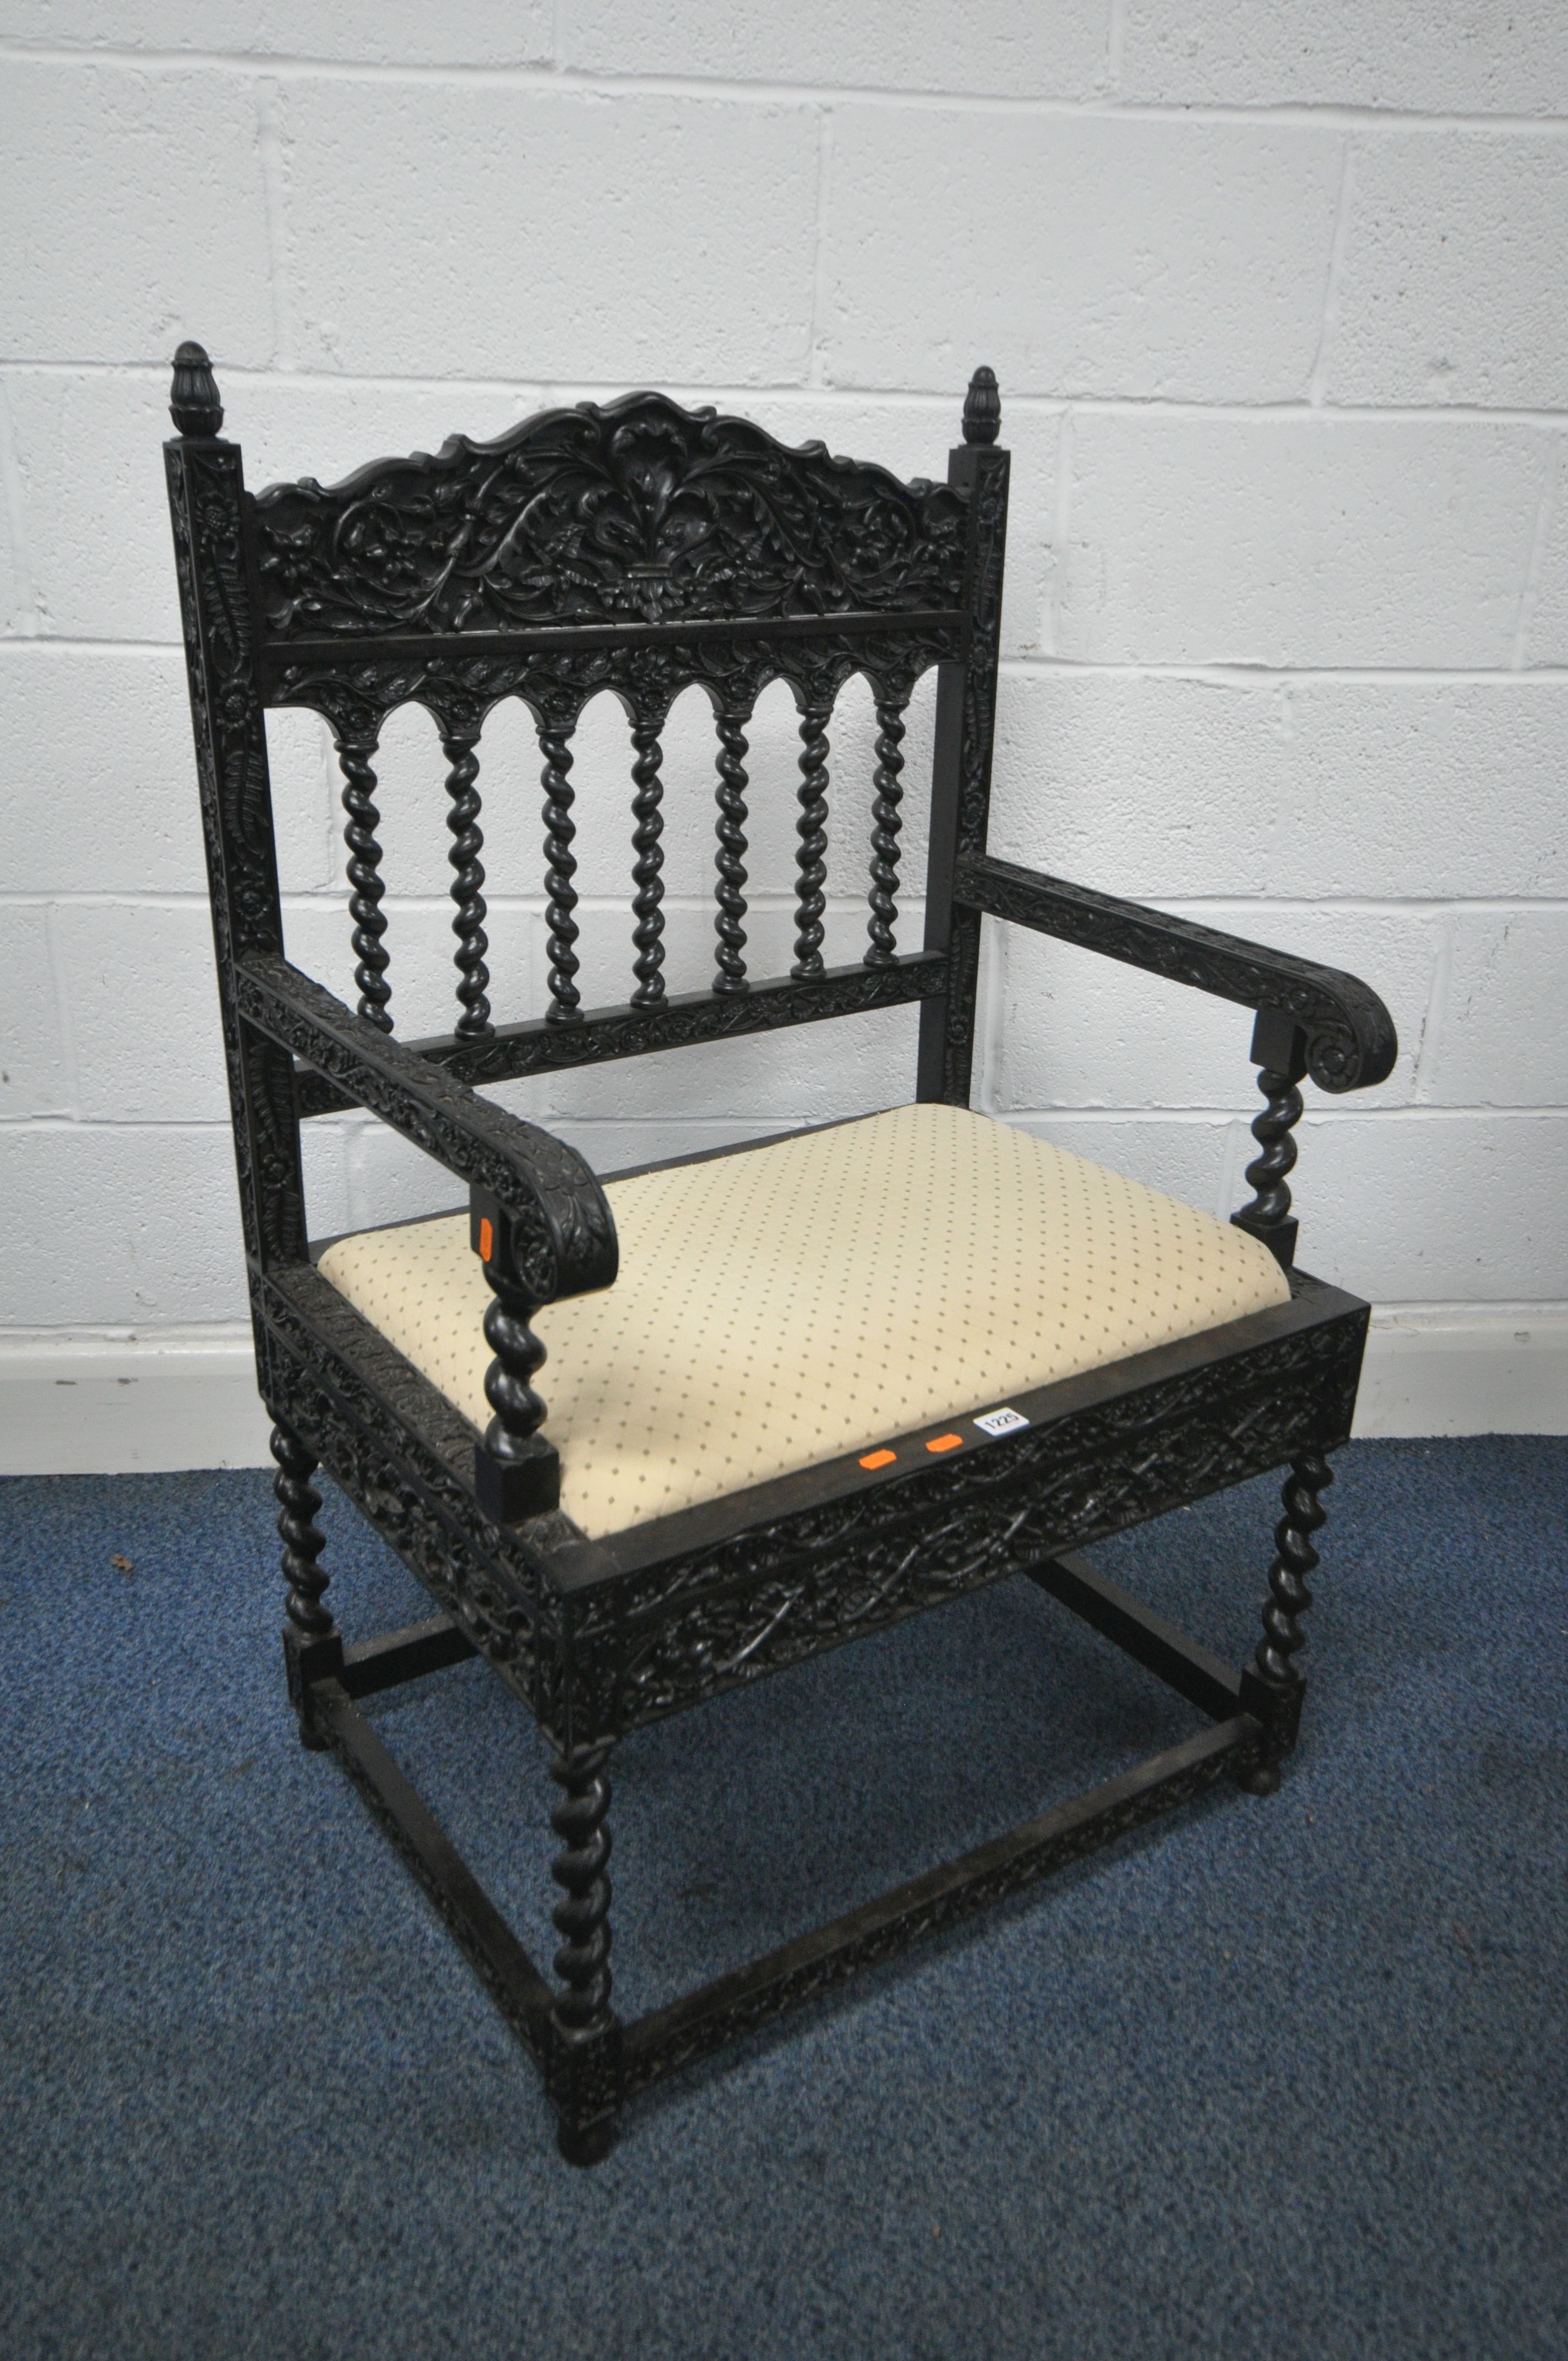 A LATE 19TH / EARLY 20TH CENTURY HEAVY EXOTIC HARDWOOD ANGLO CHINESE OPEN ARMCHAIR, ornately